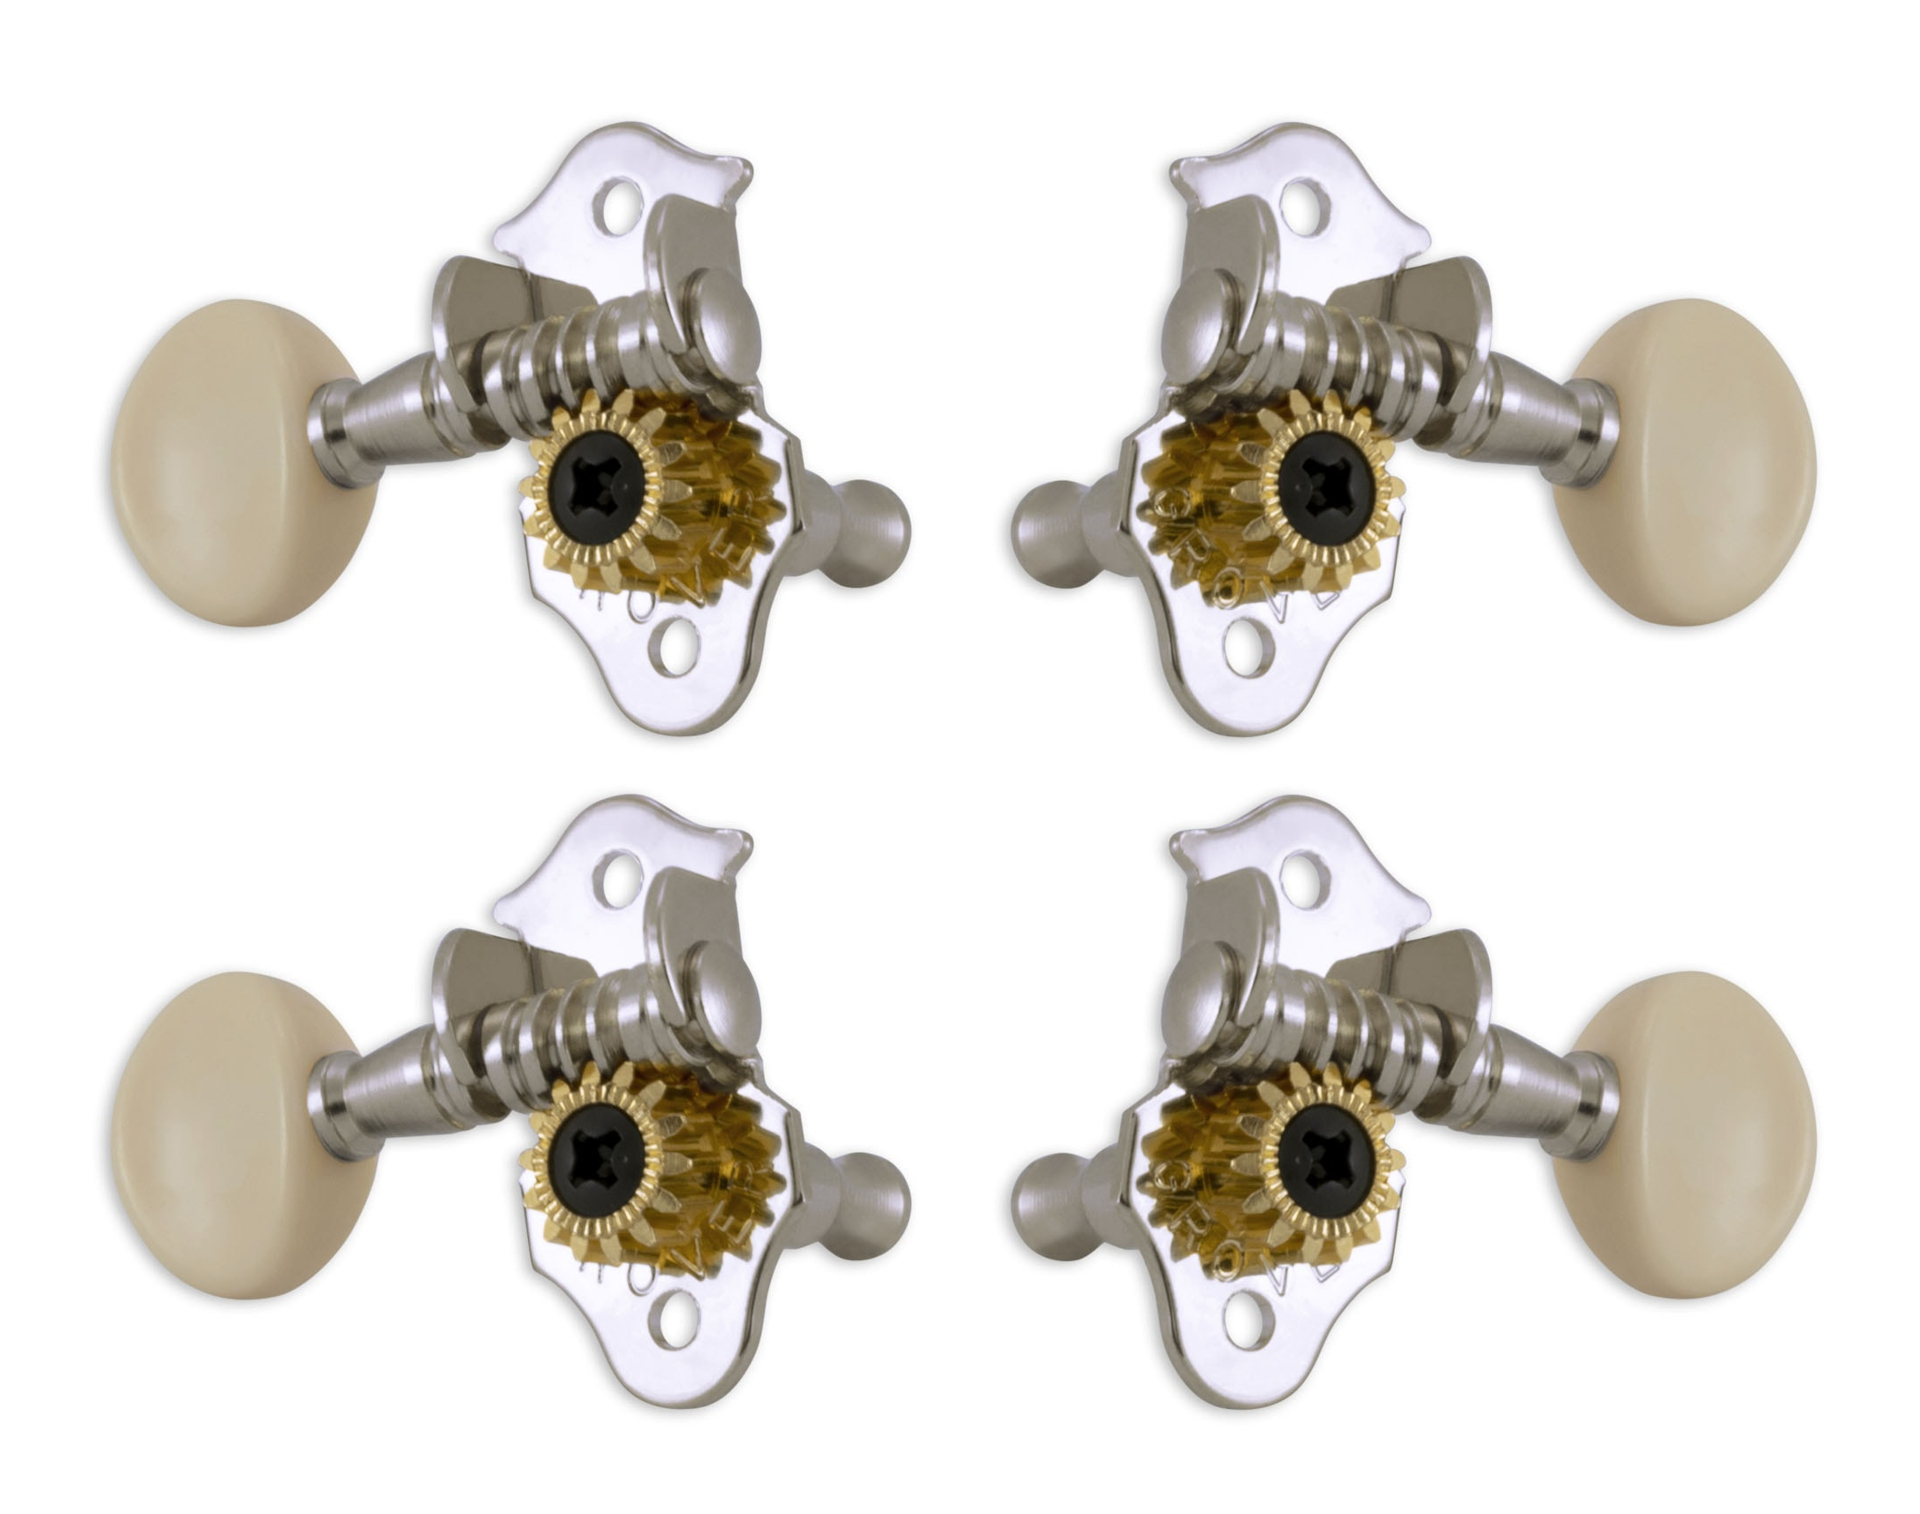 Grover 9CW Sta-Tite Geared Ukulele Pegs with White Button - 4 pcs. - Chrome